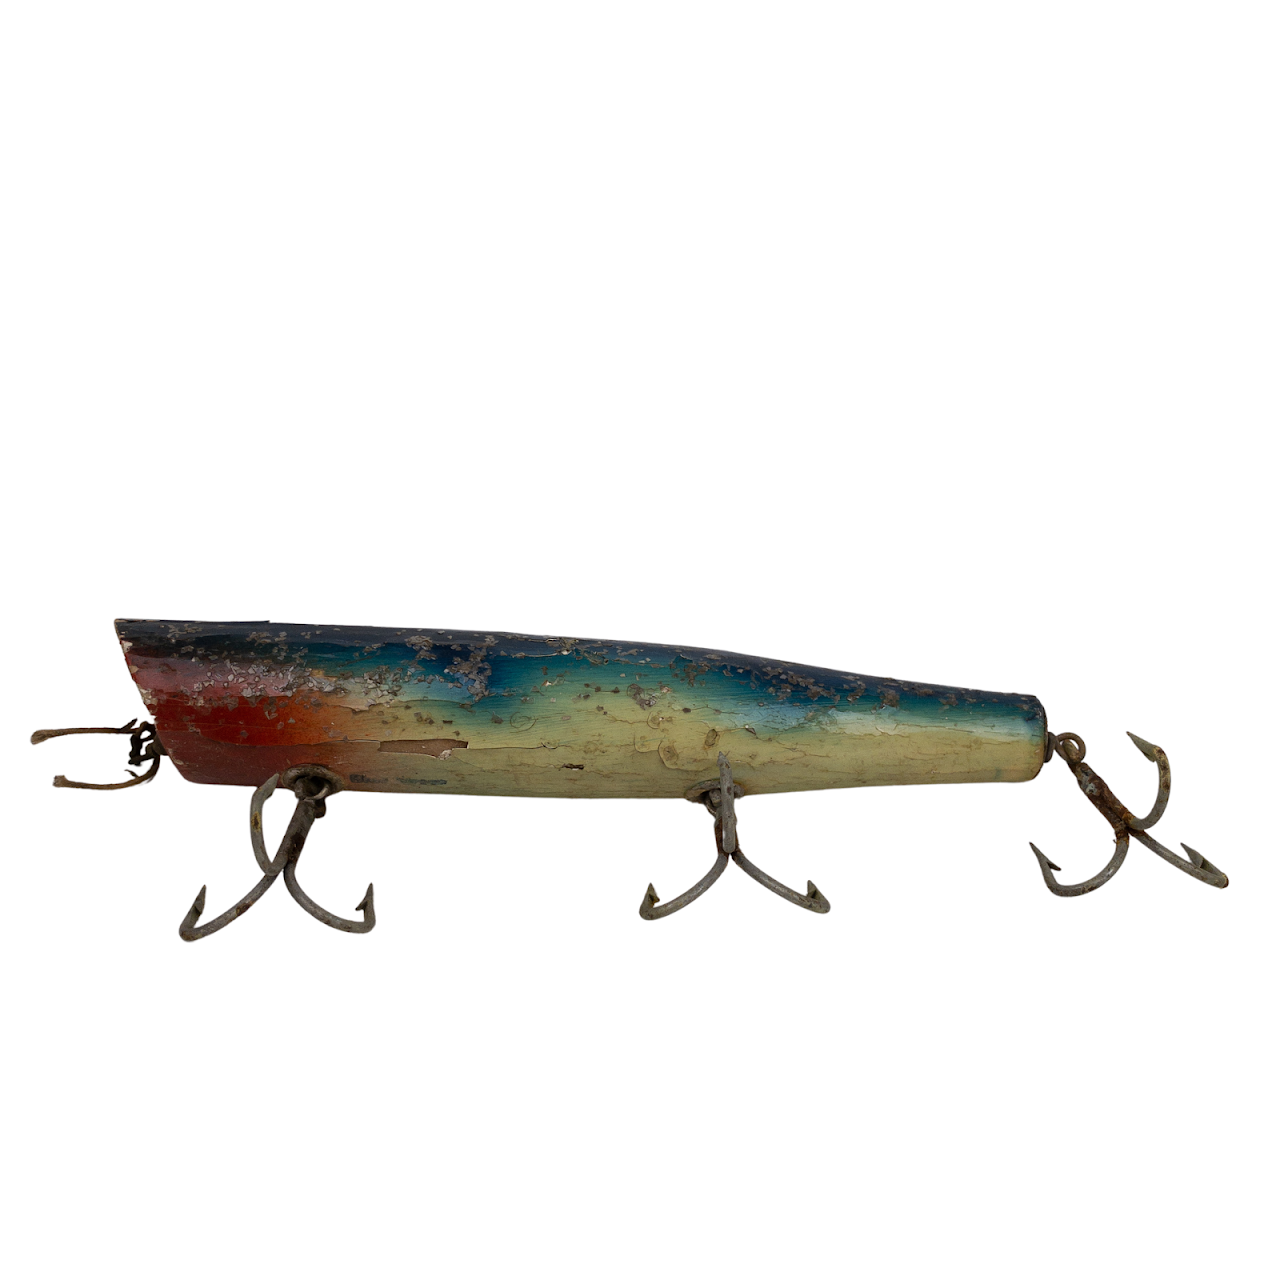 Stan Gibbs Vintage Fishing Cast-A-Lure